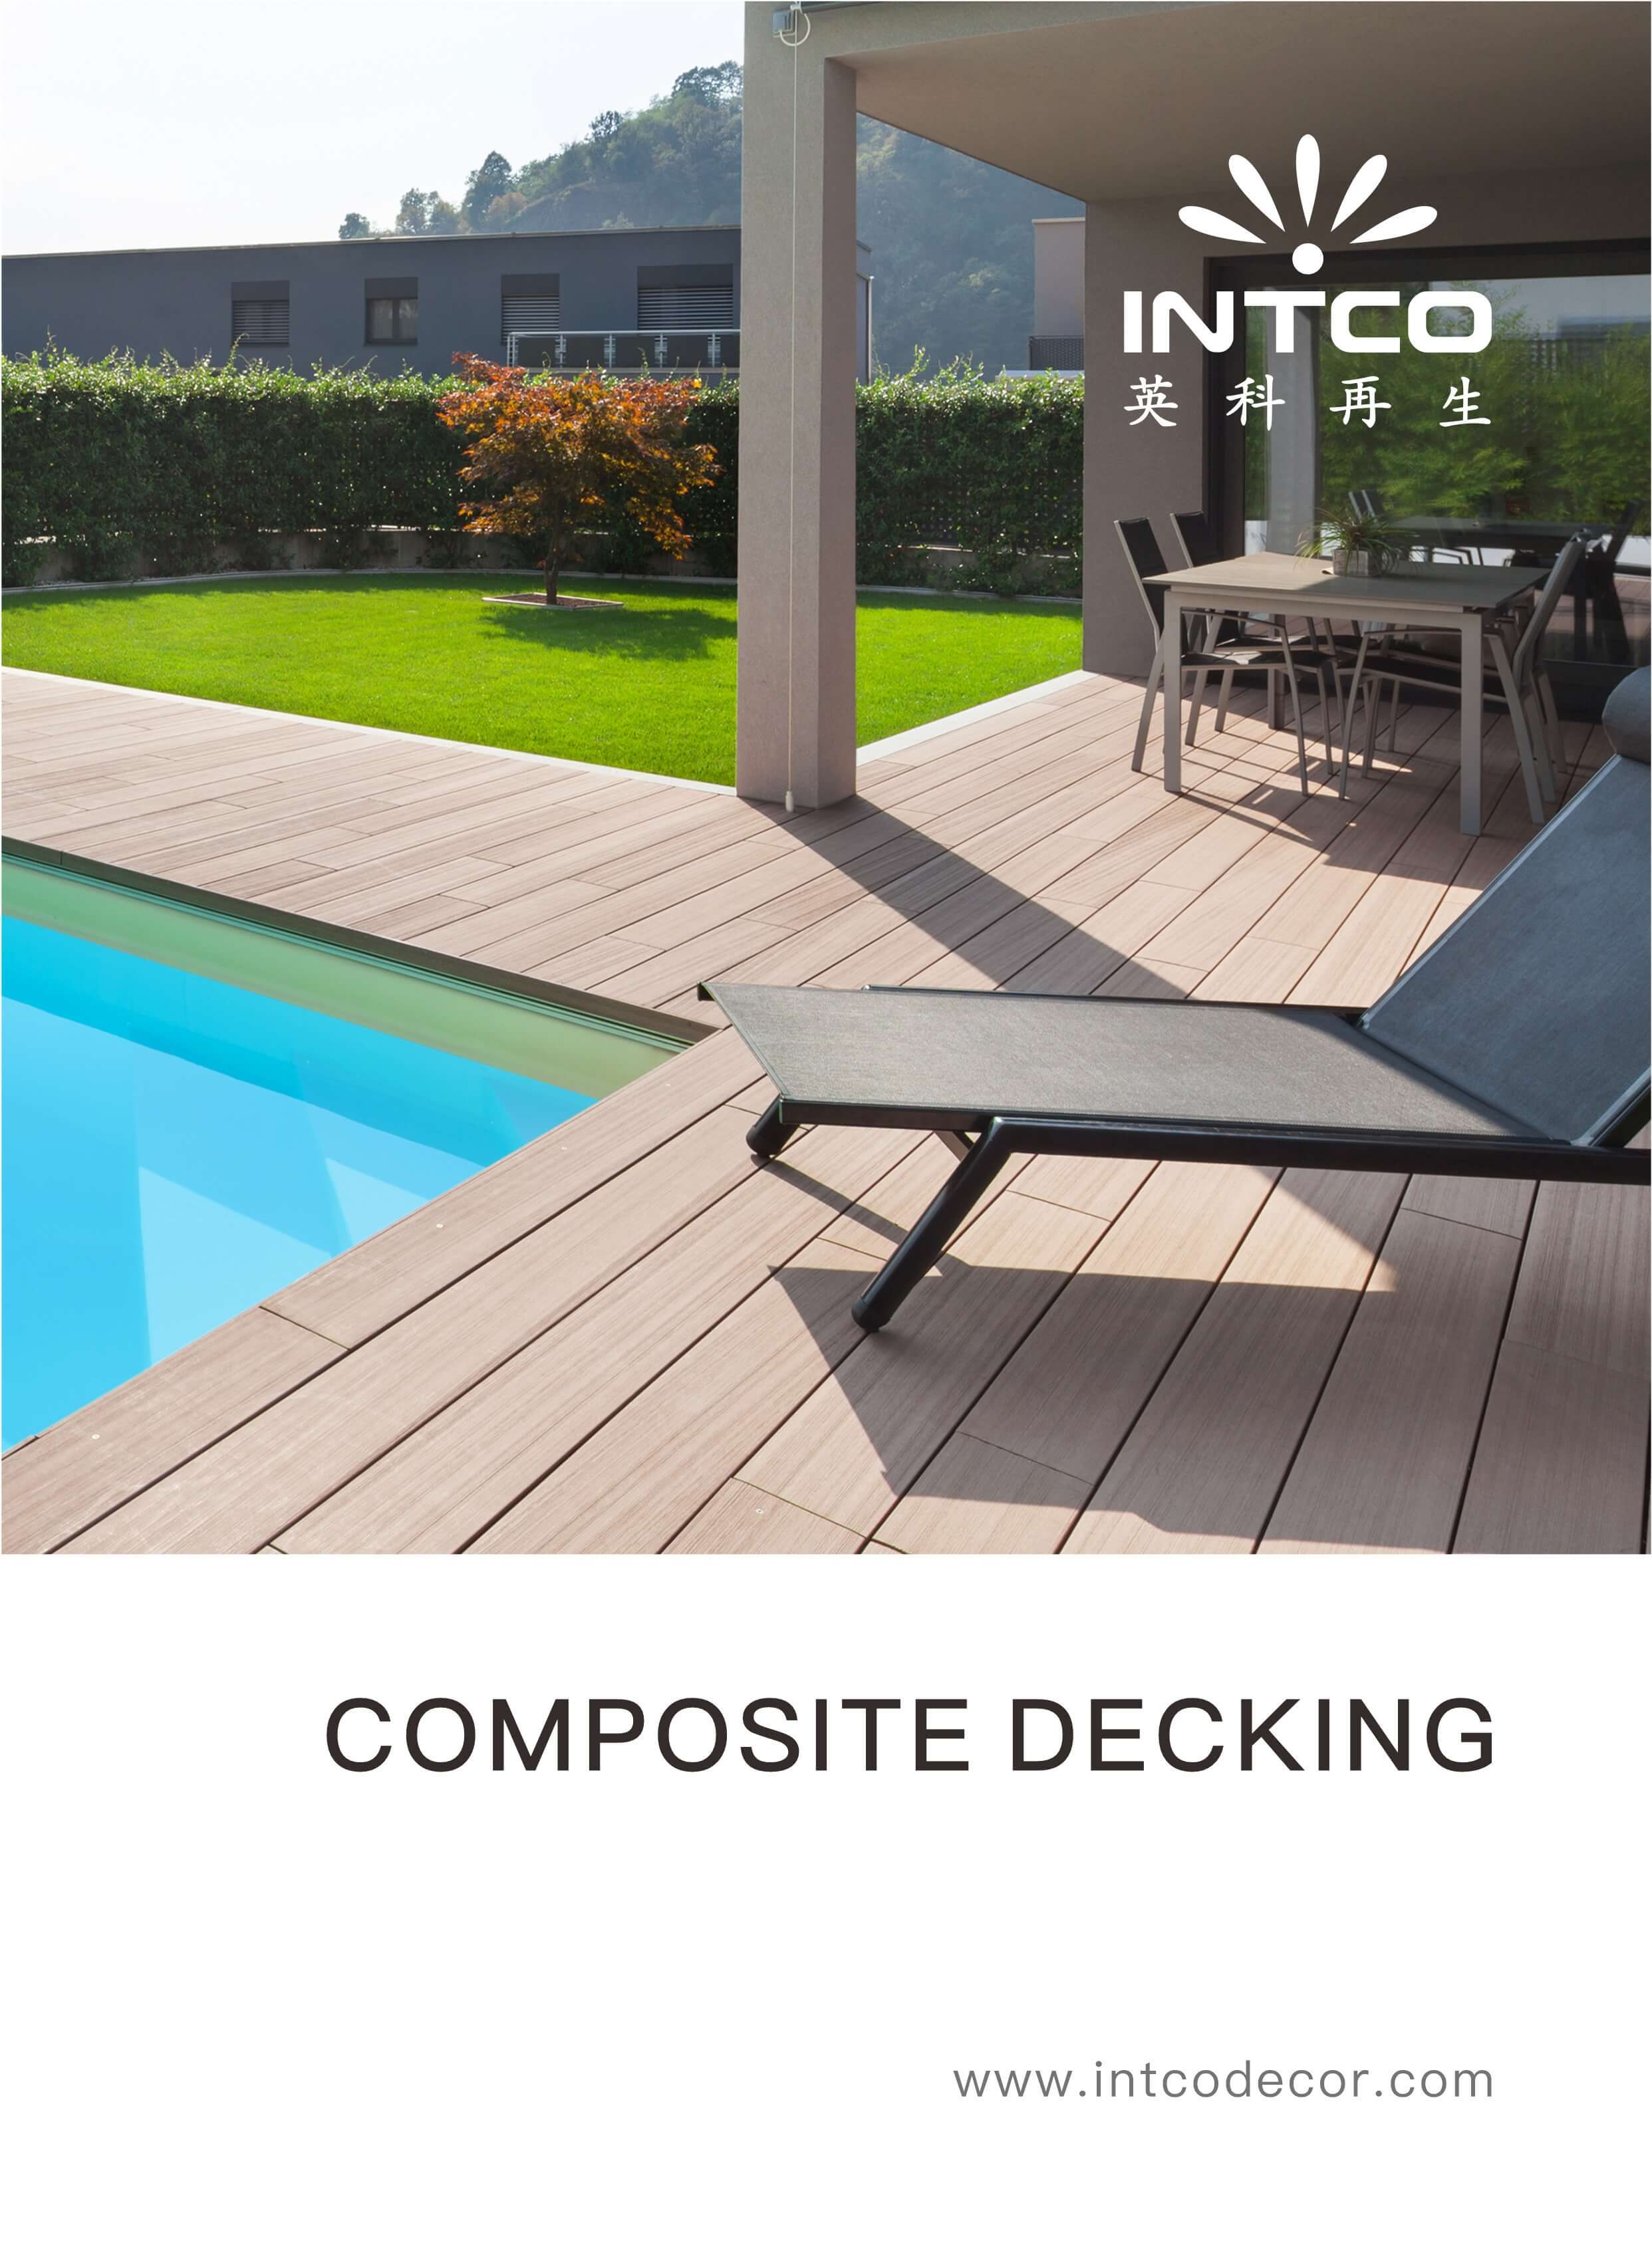 We put together Intco latest product catalogue, designed to offer you an insight into our Intco composite decking products